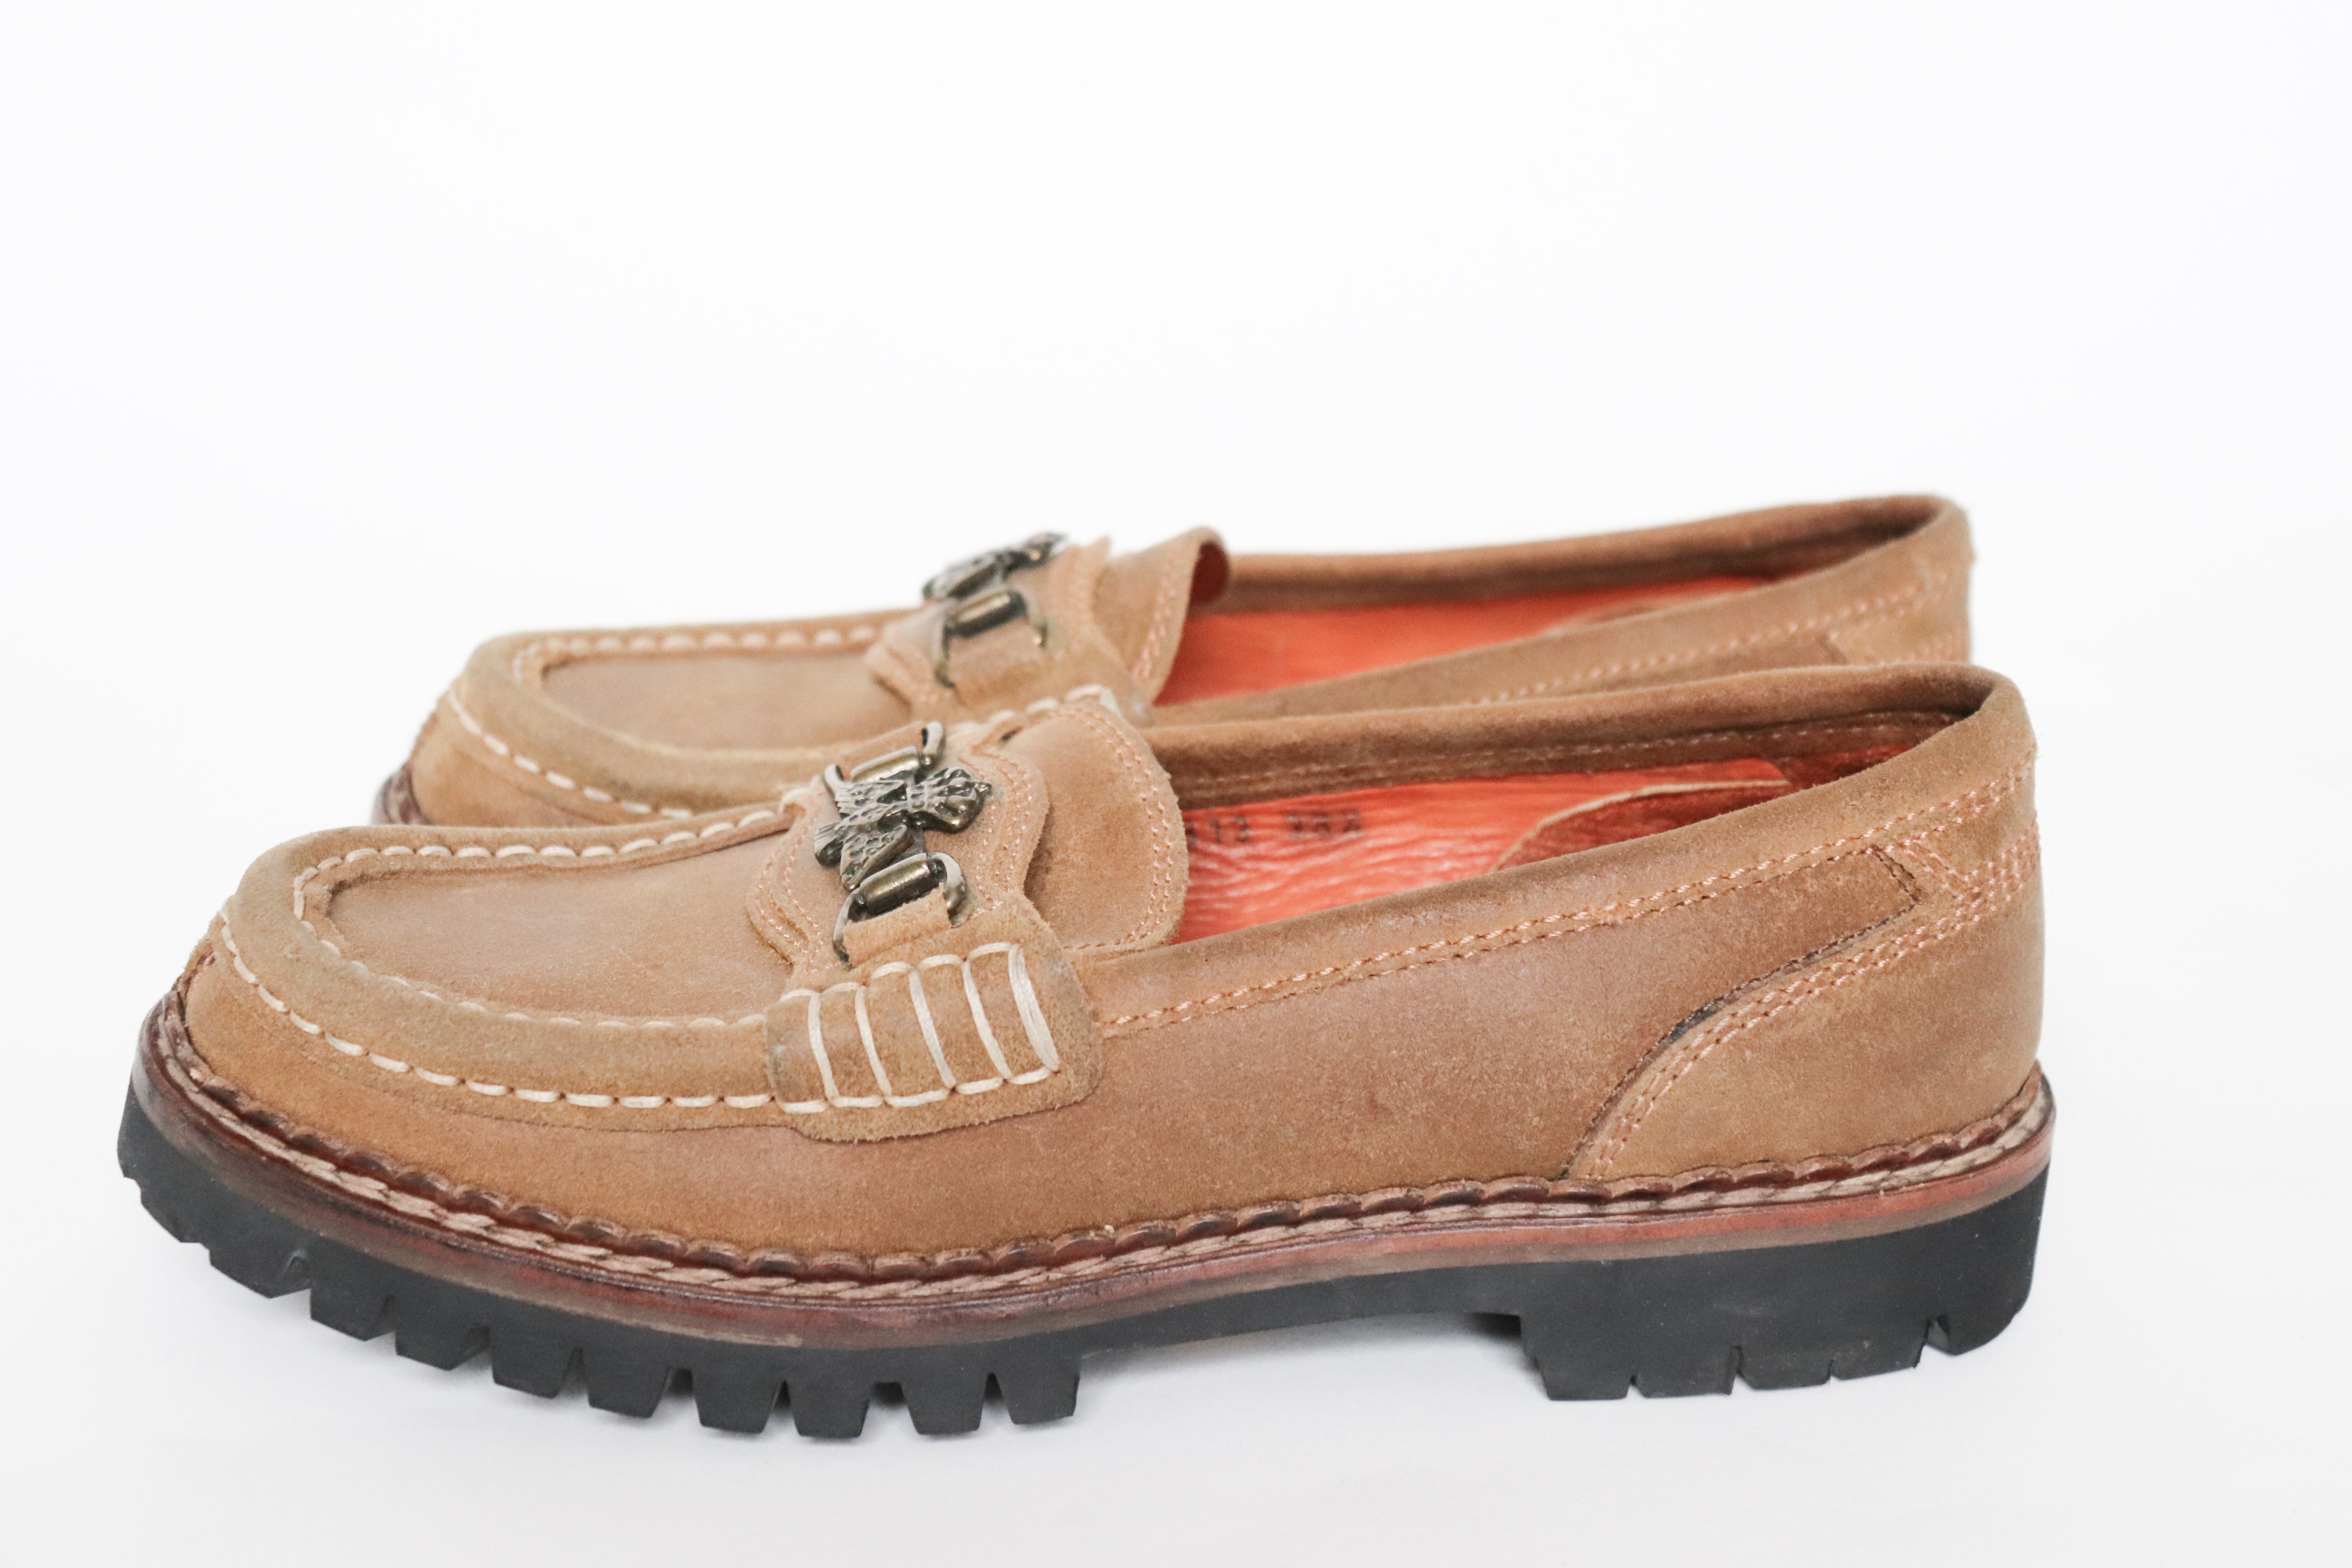 Stowe Vintage Loafers - Tirol -   Brown Suede  Leather  - (Label 38.5) Fit Narrow 38